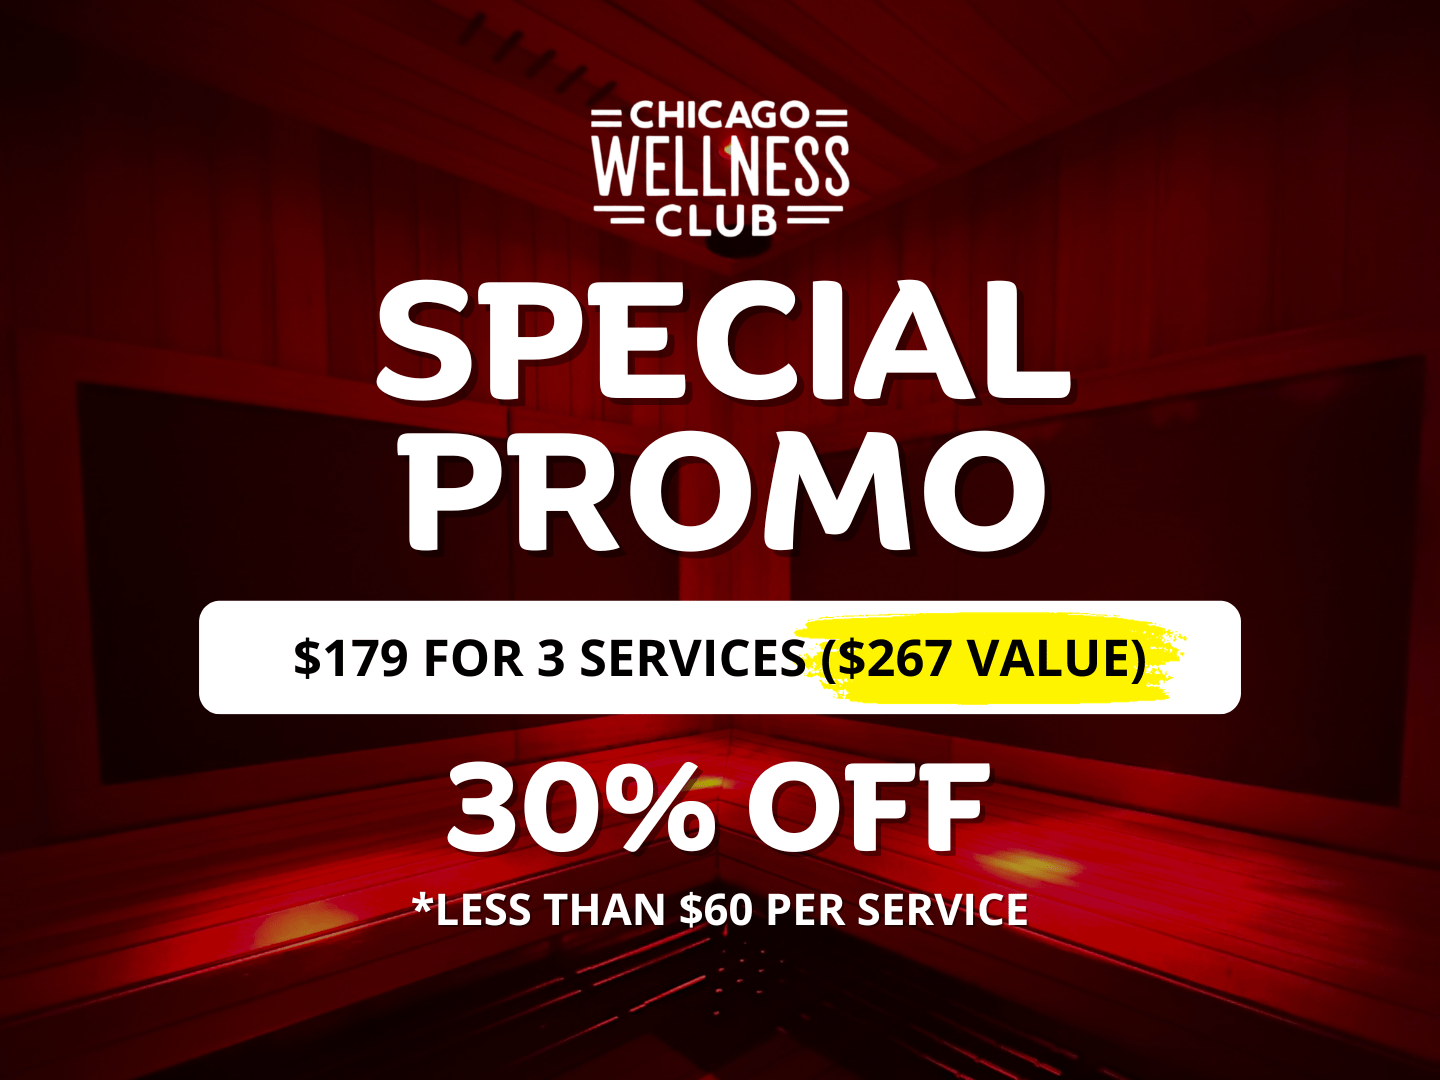 Spa Self-Care Package: Save 30% on 3 Sessions with Chicago Wellness Club